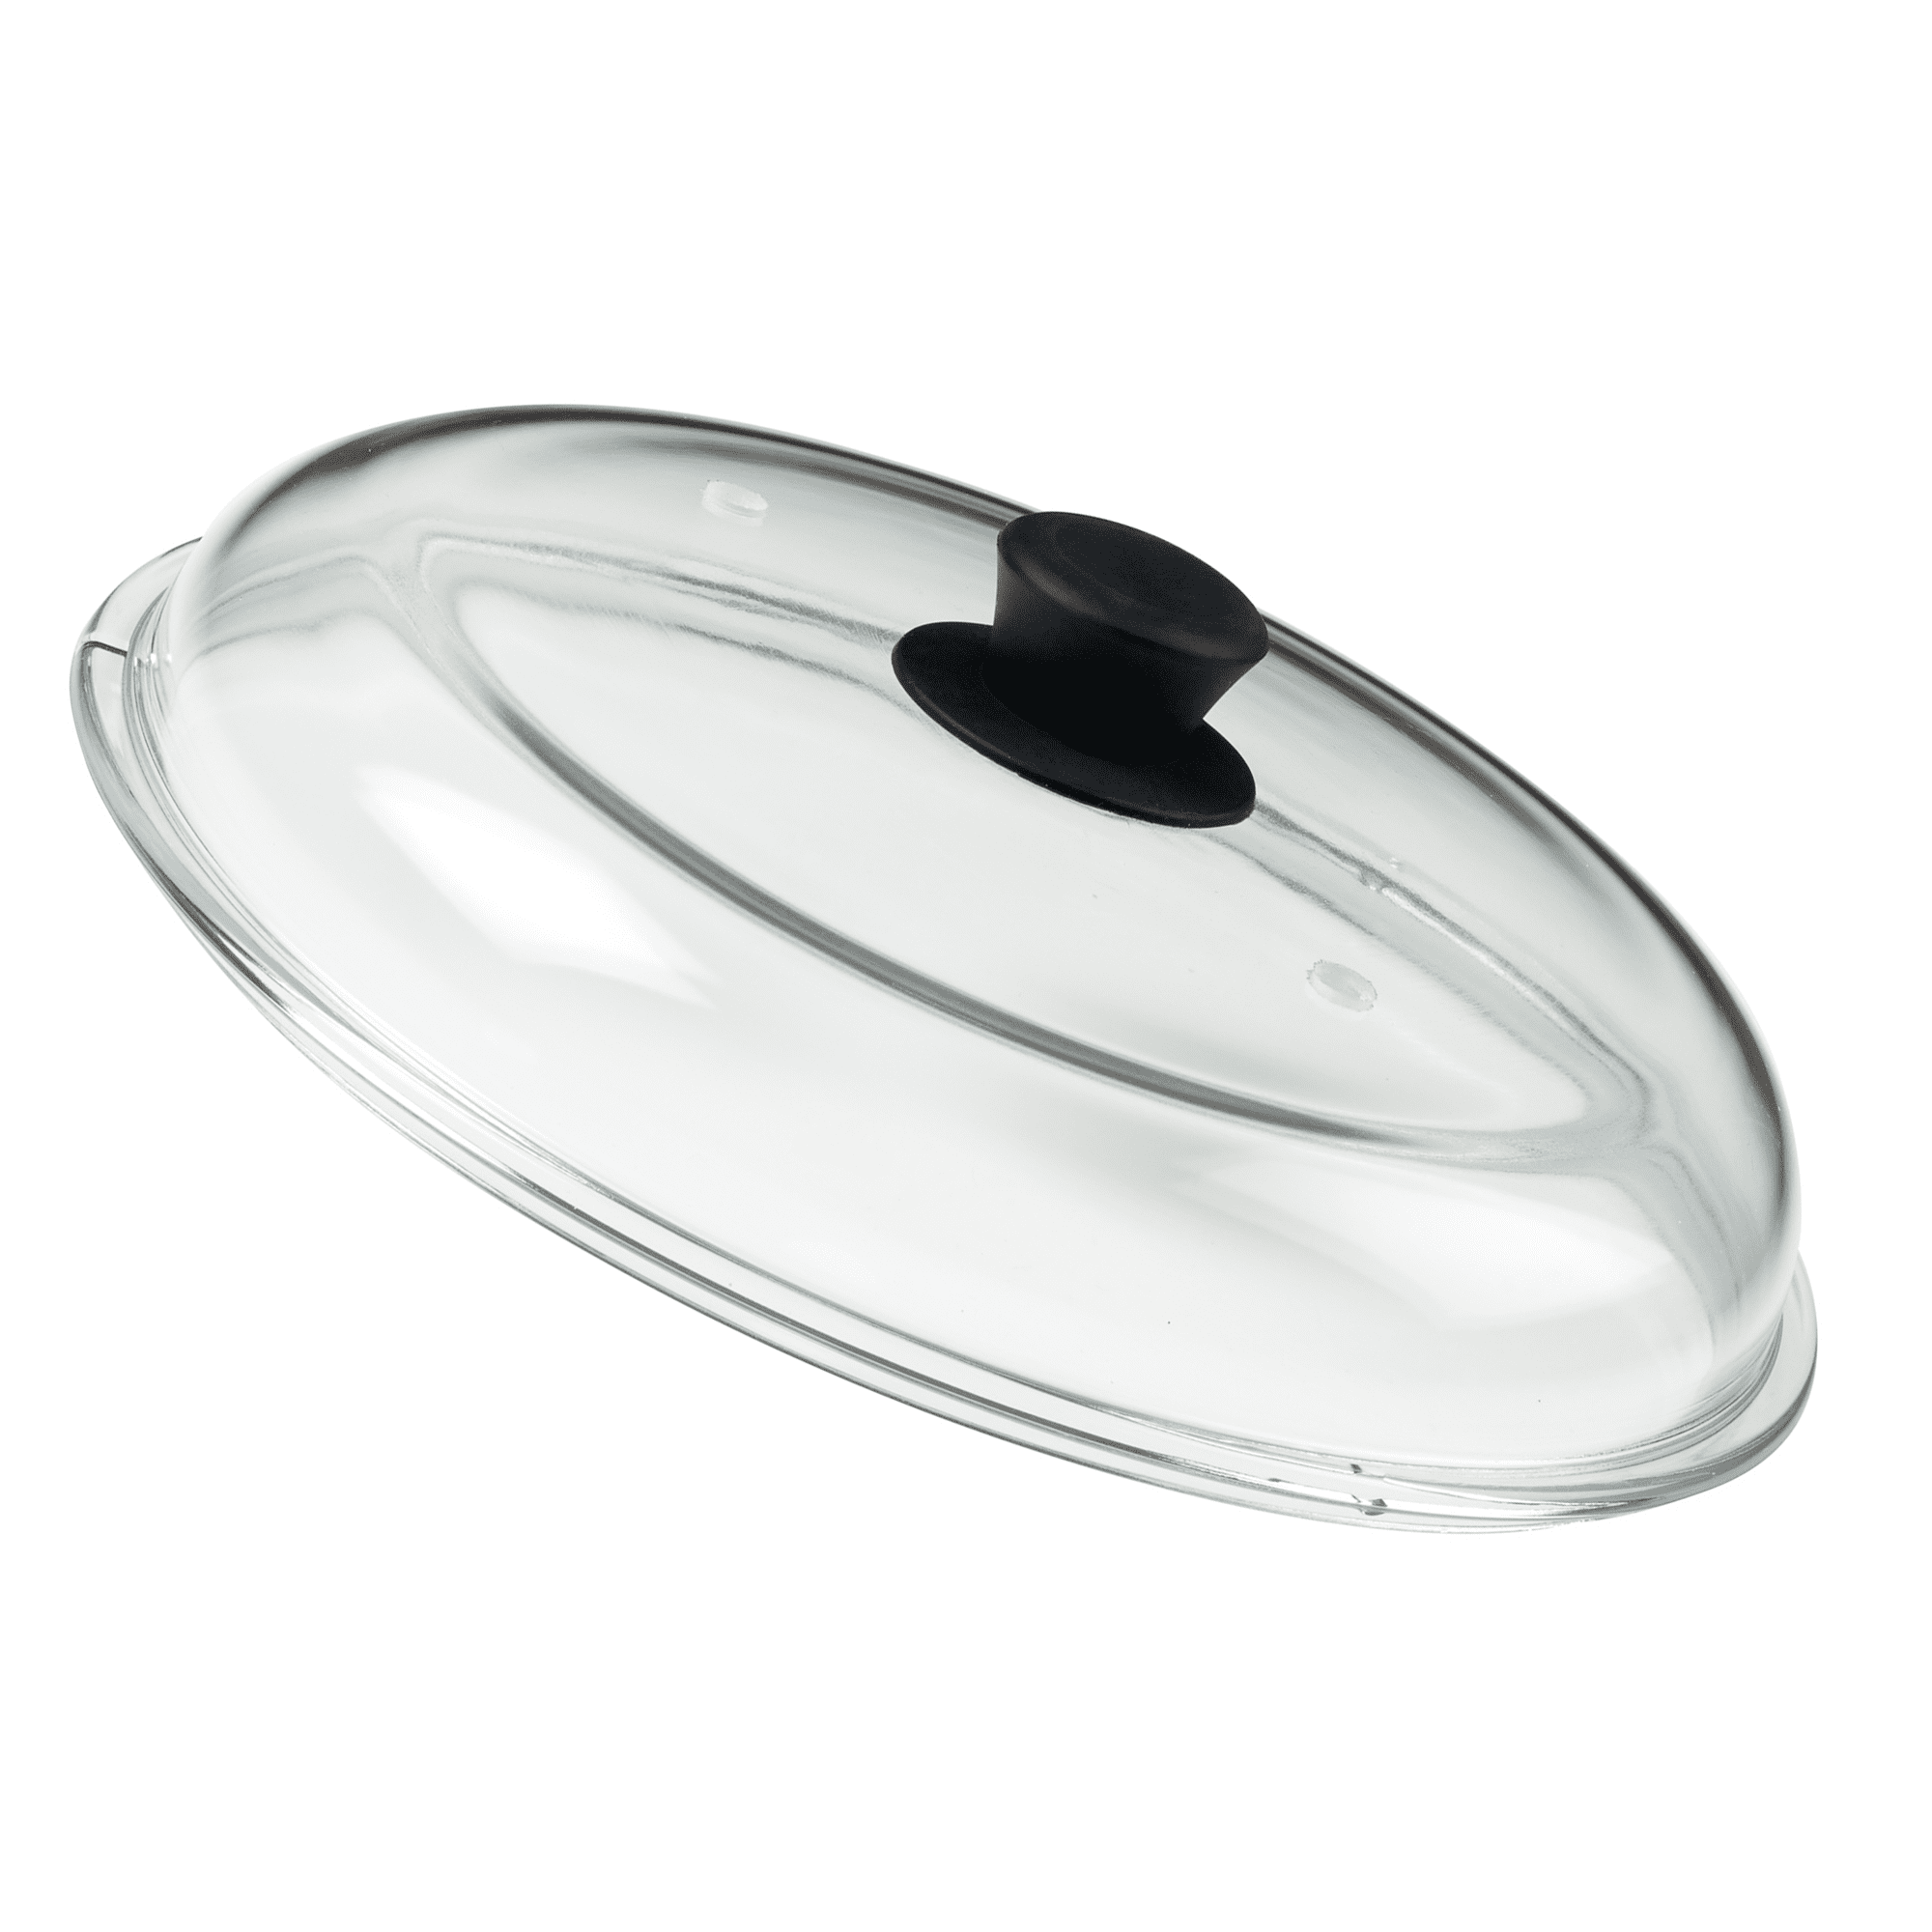 Bezrat Microwave Glass Plate Cover | Splatter Guard Lid with Easy Grip